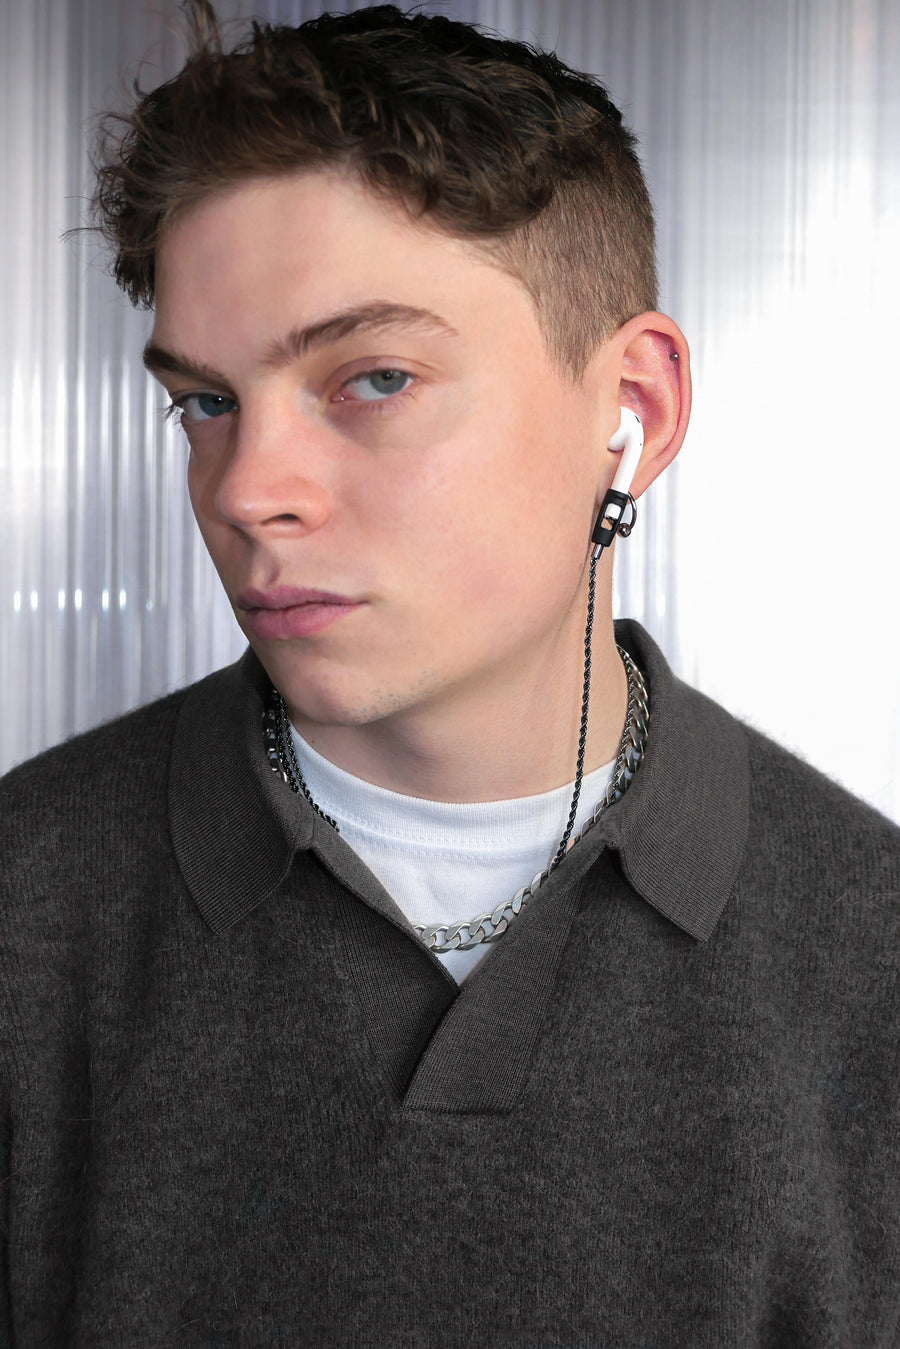 Tapper's real hematite black plated original rope chain jewelry necklace protects your Apple AirPods & AirPods Pro. The luxurious, elevated & accessible rope chain jewellery plated in precious metals snaps the AirPods around your neck. Lost your AirPods? Magnetic lock for convenient and hassle-free safekeeping around your neck. The next must-have & affordable AirPods accessory crafted for ultimate luxury. Compatible with AirPods & AirPods Pro. Designed in Sweden by Tapper. Free Shipping at gettapper.com